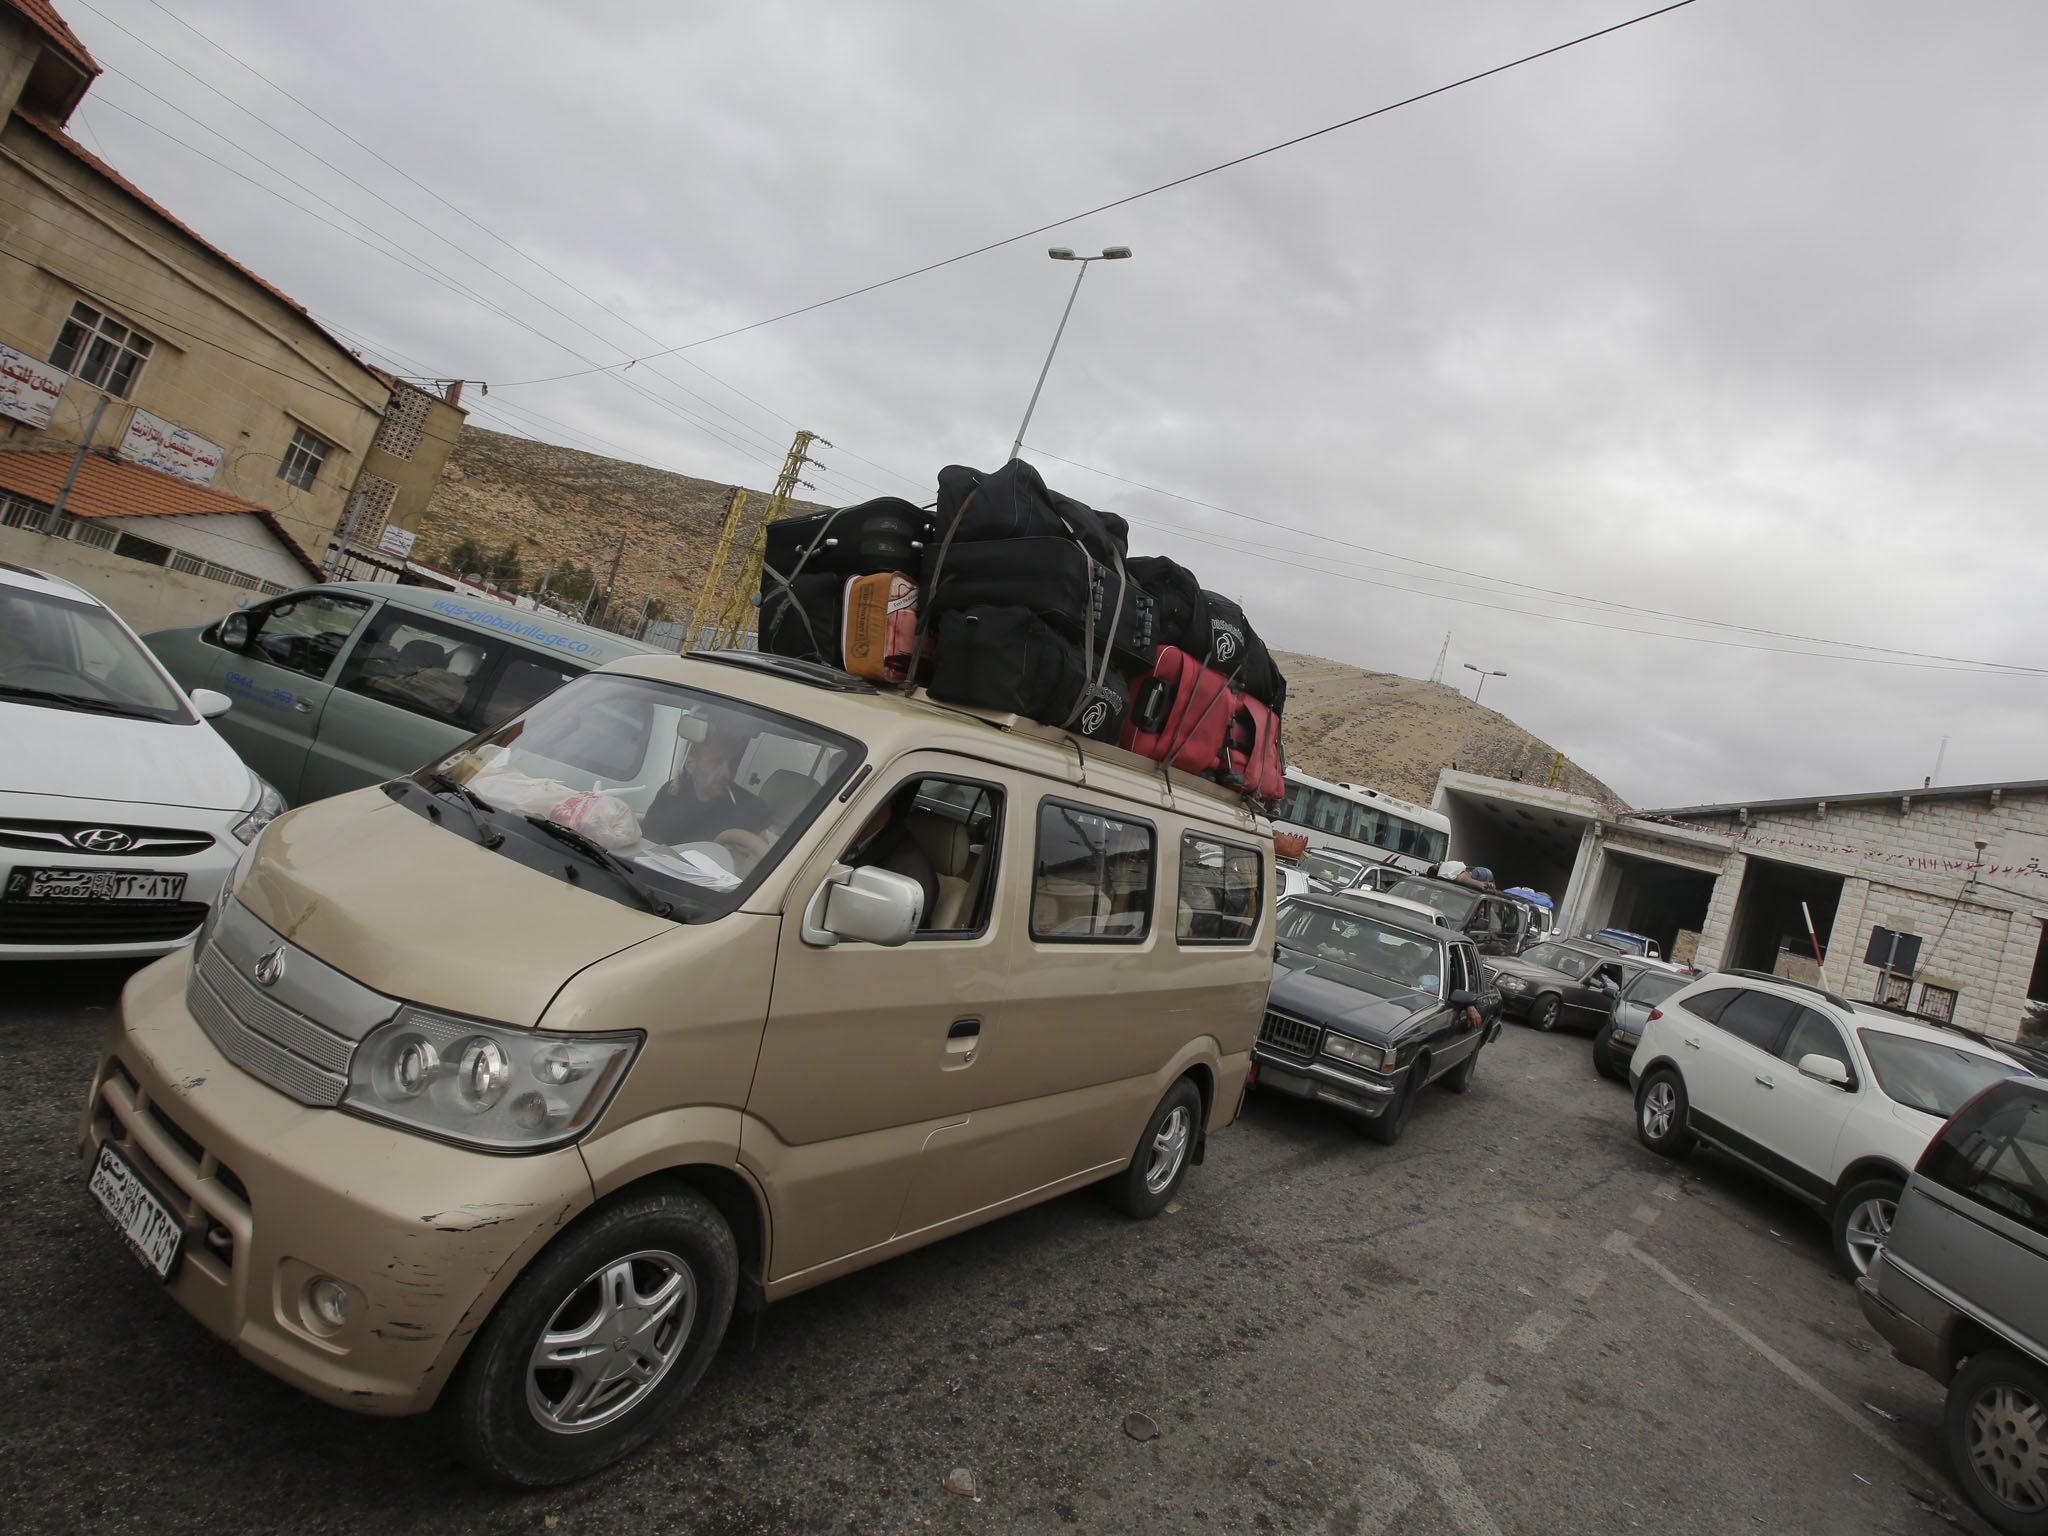 Palestinians and Syrians who fled violence in their country are seen at the Masnaa Lebanese border crossing with Syria as people stamp their documents before entering Lebanon on December 19, 2012. A large number of Palestinians refugees and others who fle